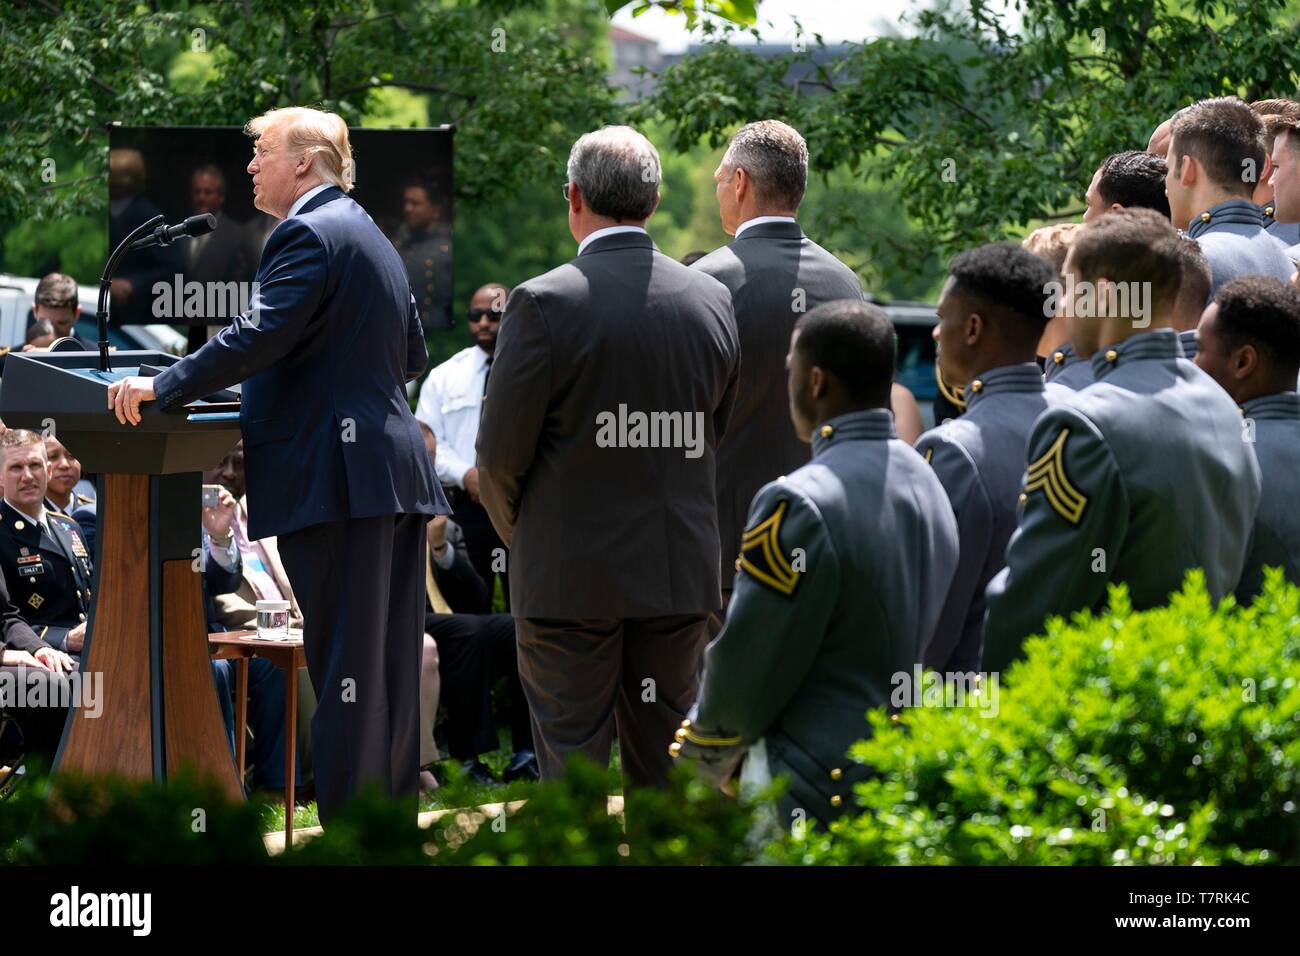 U.S President Donald Trump speaks during the Commander in Chiefs trophy presentation at the Rose Garden of the White House May 6, 2019 in Washington, DC. The Army Black Knights of the U.S. Military Academy football team are the 2018 champions. Stock Photo